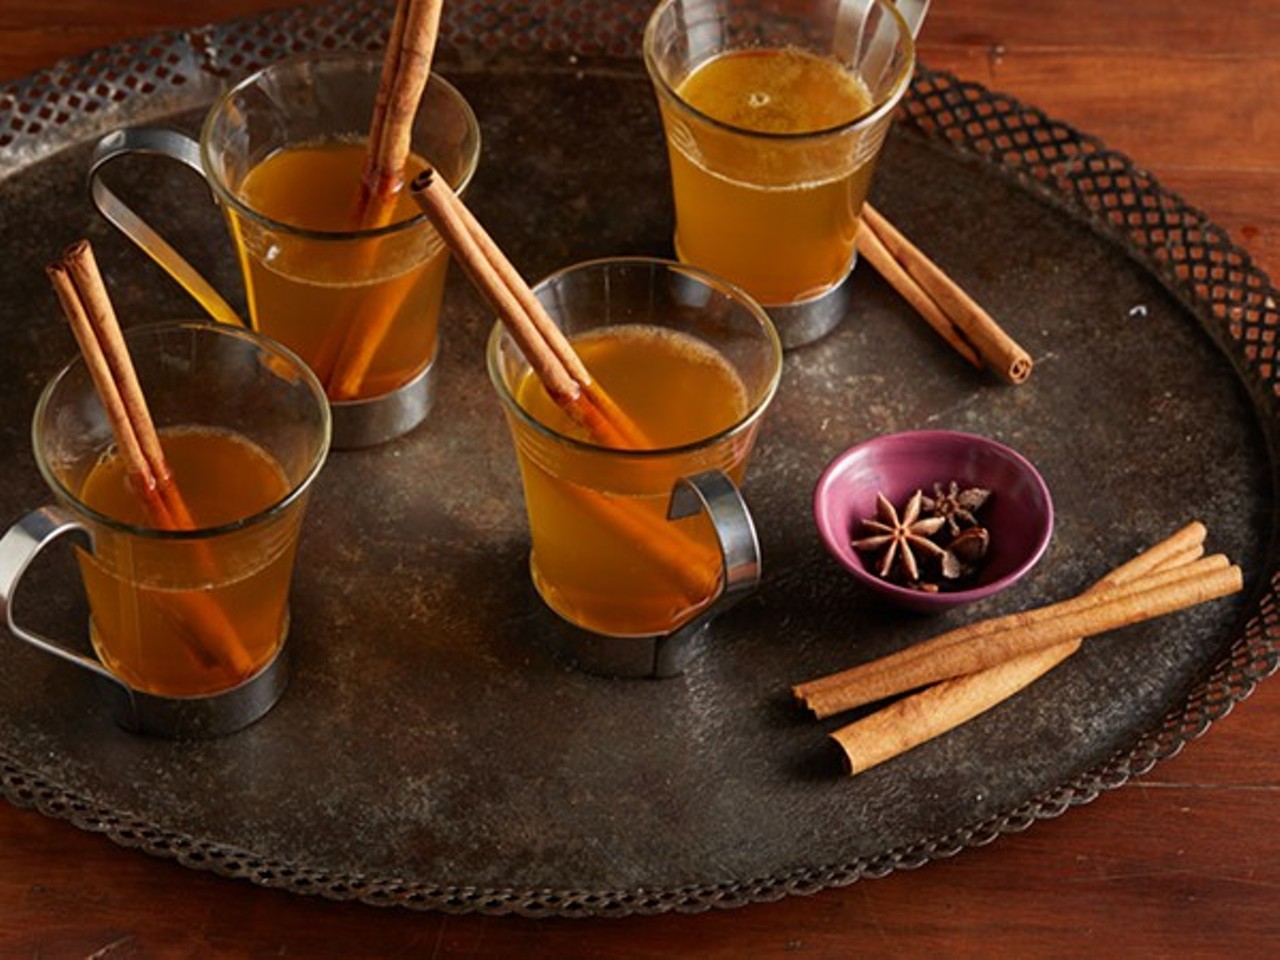 Hot Mulled Cider - Heat up a batch of this traditional mulled cider and encourage your family to keep it classy this Thanksgiving. Find the recipe at Food Network.